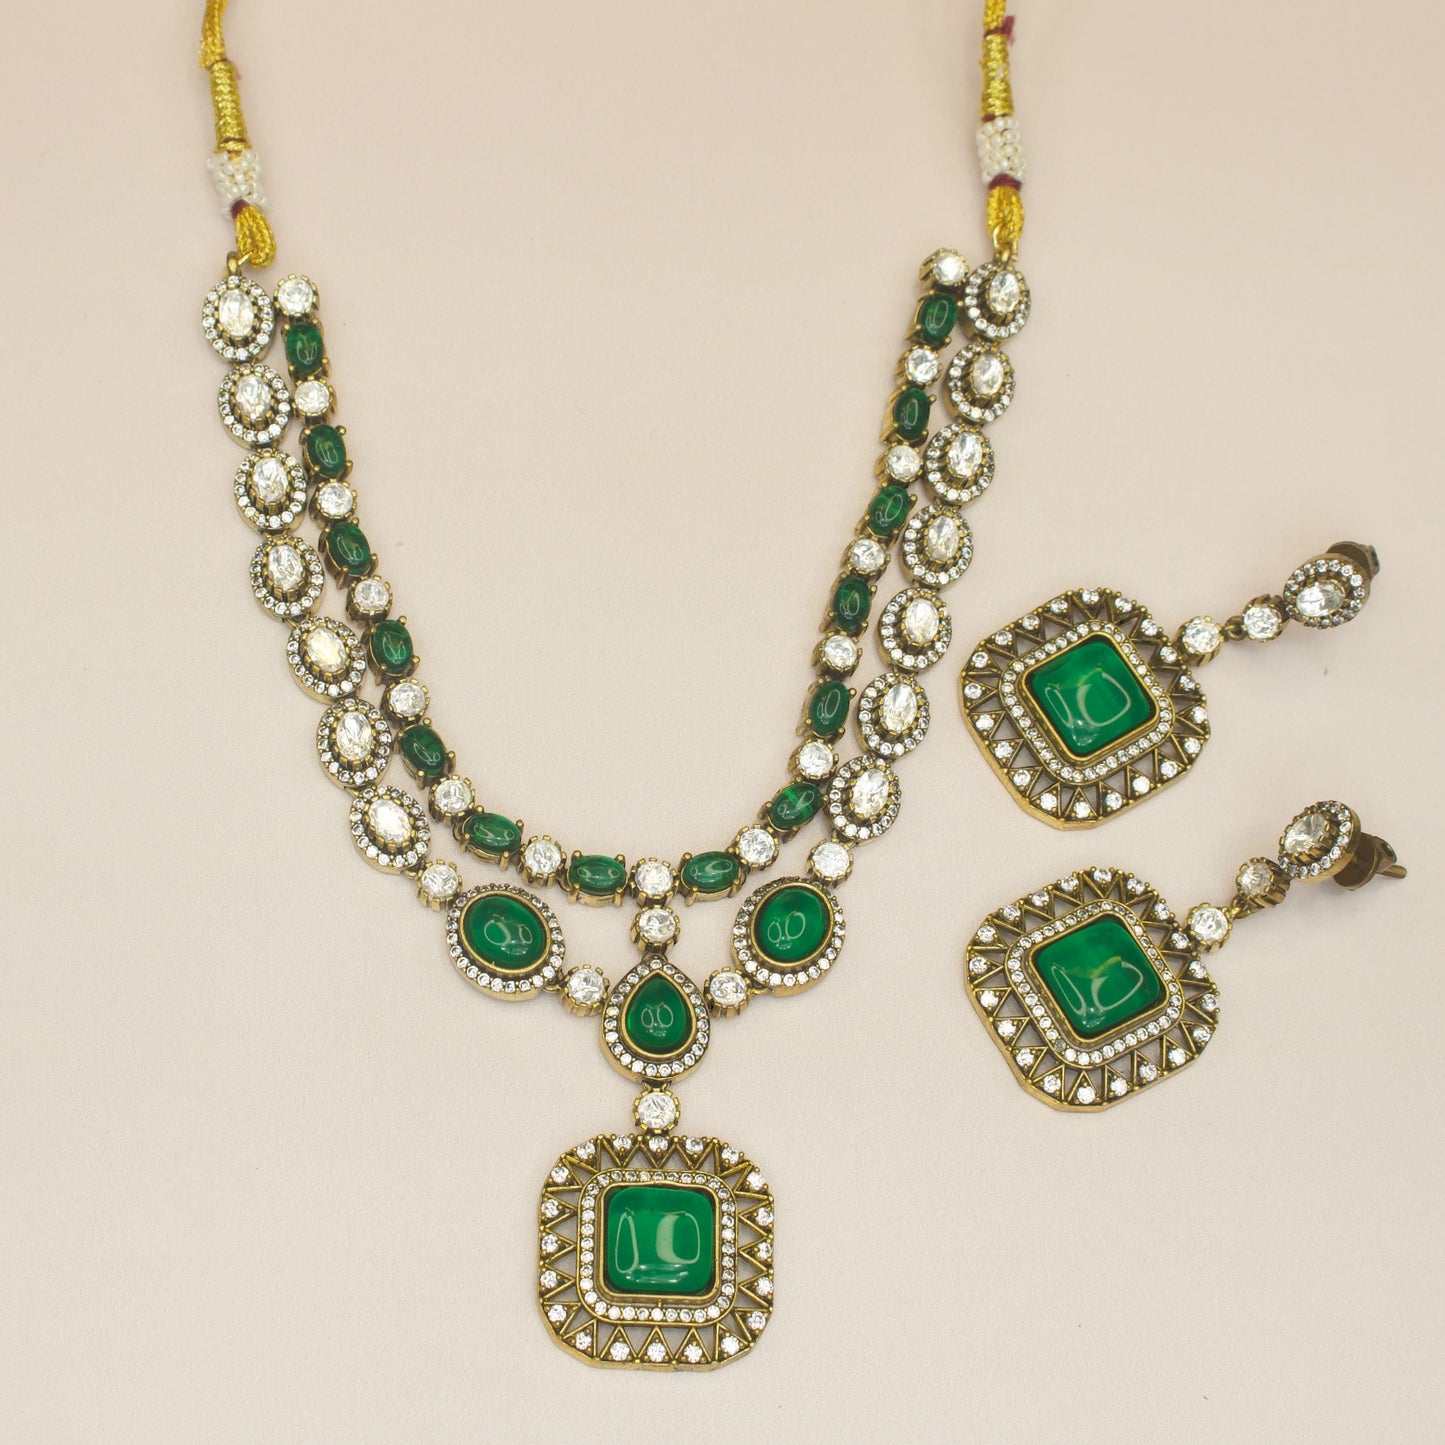 Two-Line Victorian Diamond Necklace with earrings